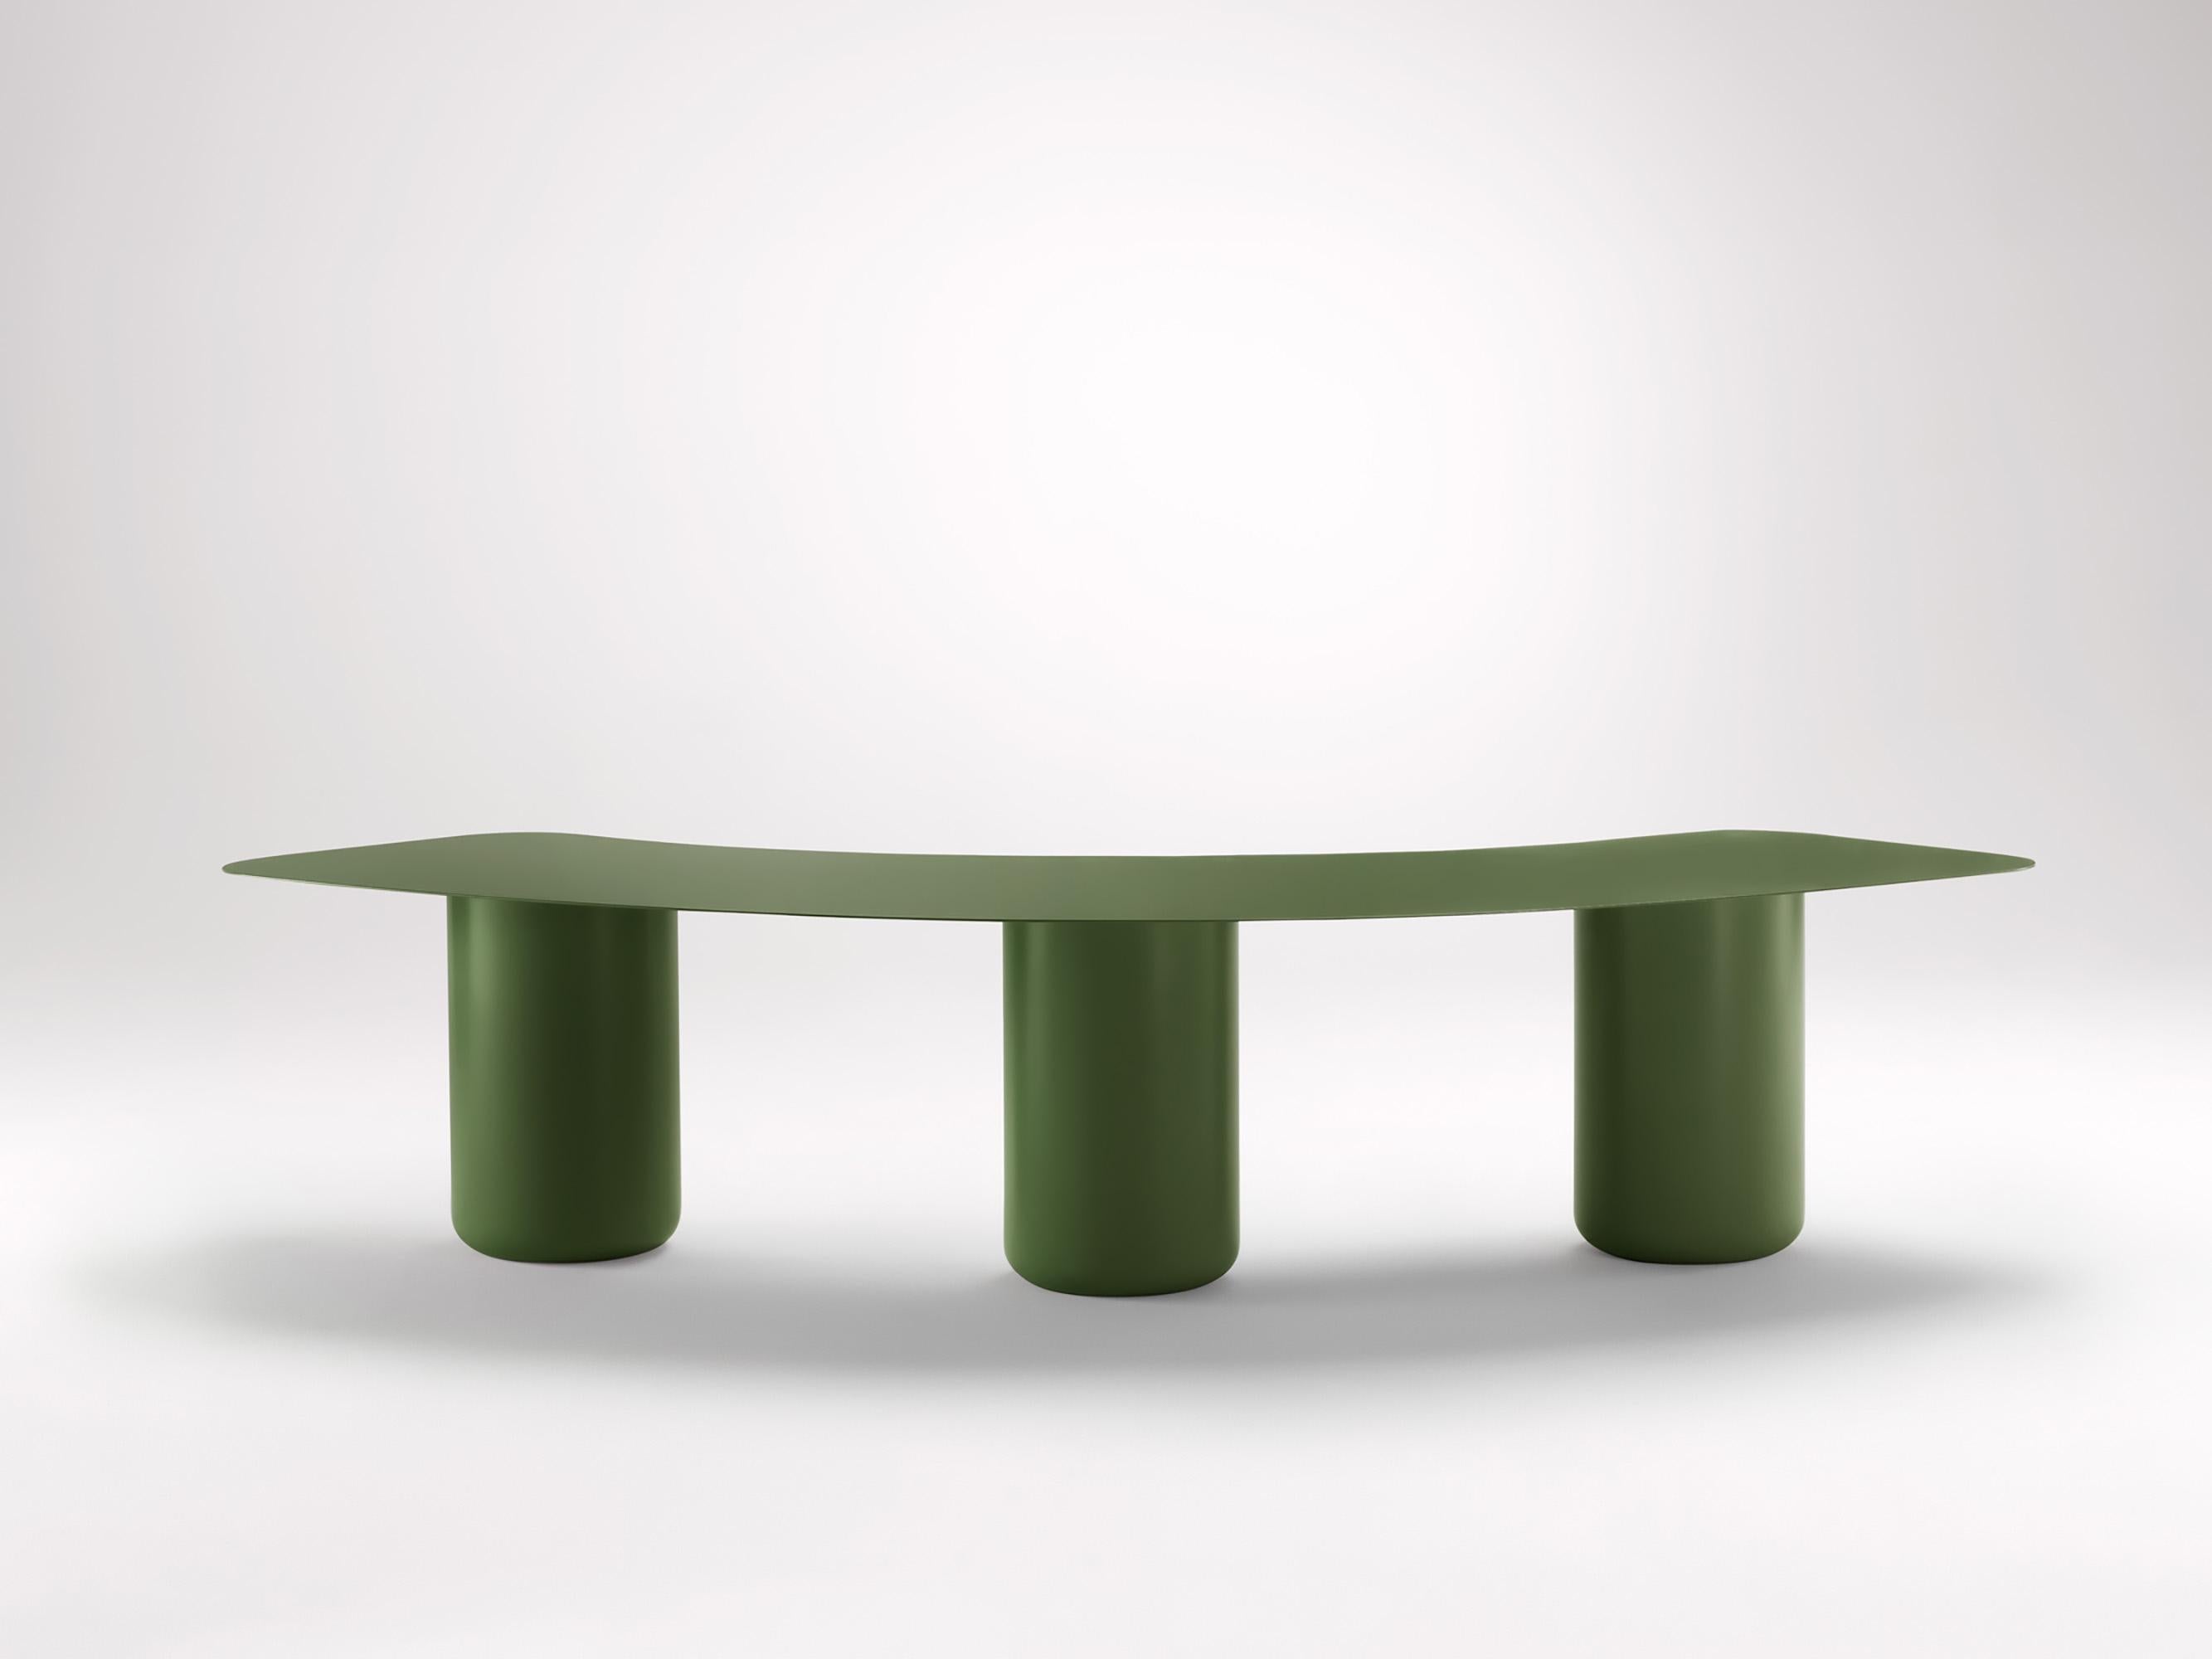 Small Olive Green Curved Bench by Coco Flip
Dimensions: D 65 x W 165 x H 42 cm
Materials: Mild steel, powder-coated with zinc undercoat. 
Weight: 42 kg

Coco Flip is a Melbourne based furniture and lighting design studio, run by us, Kate Stokes and